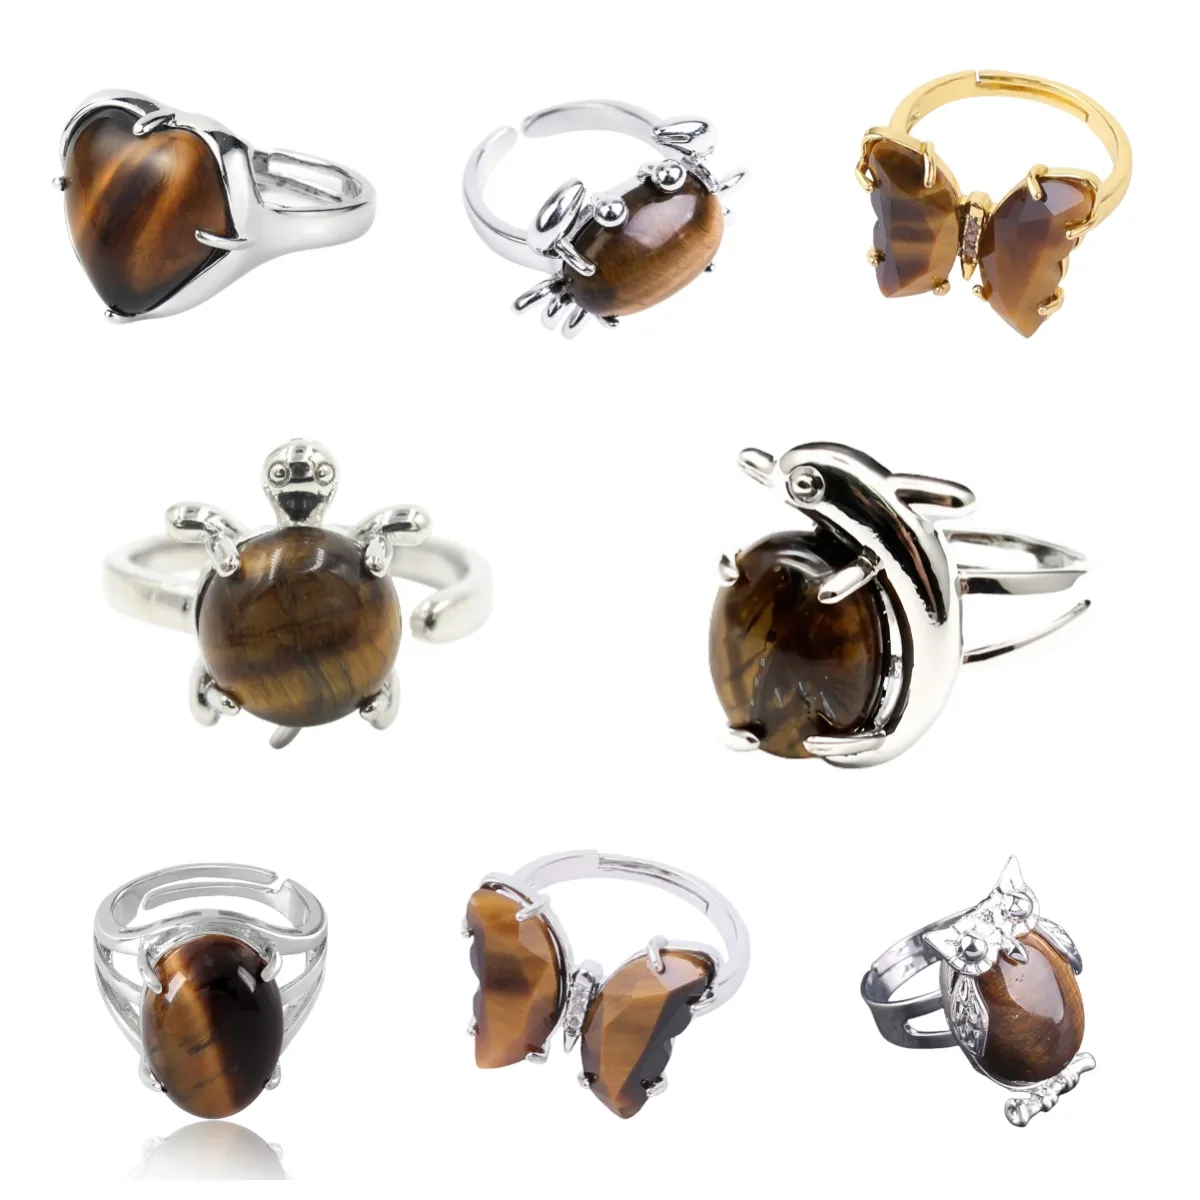 Vintage Tiger Eye Stone Ring with Multiple Styles Silver Alloy Ring Owl Shape Ring Best Gift for Friends and Families